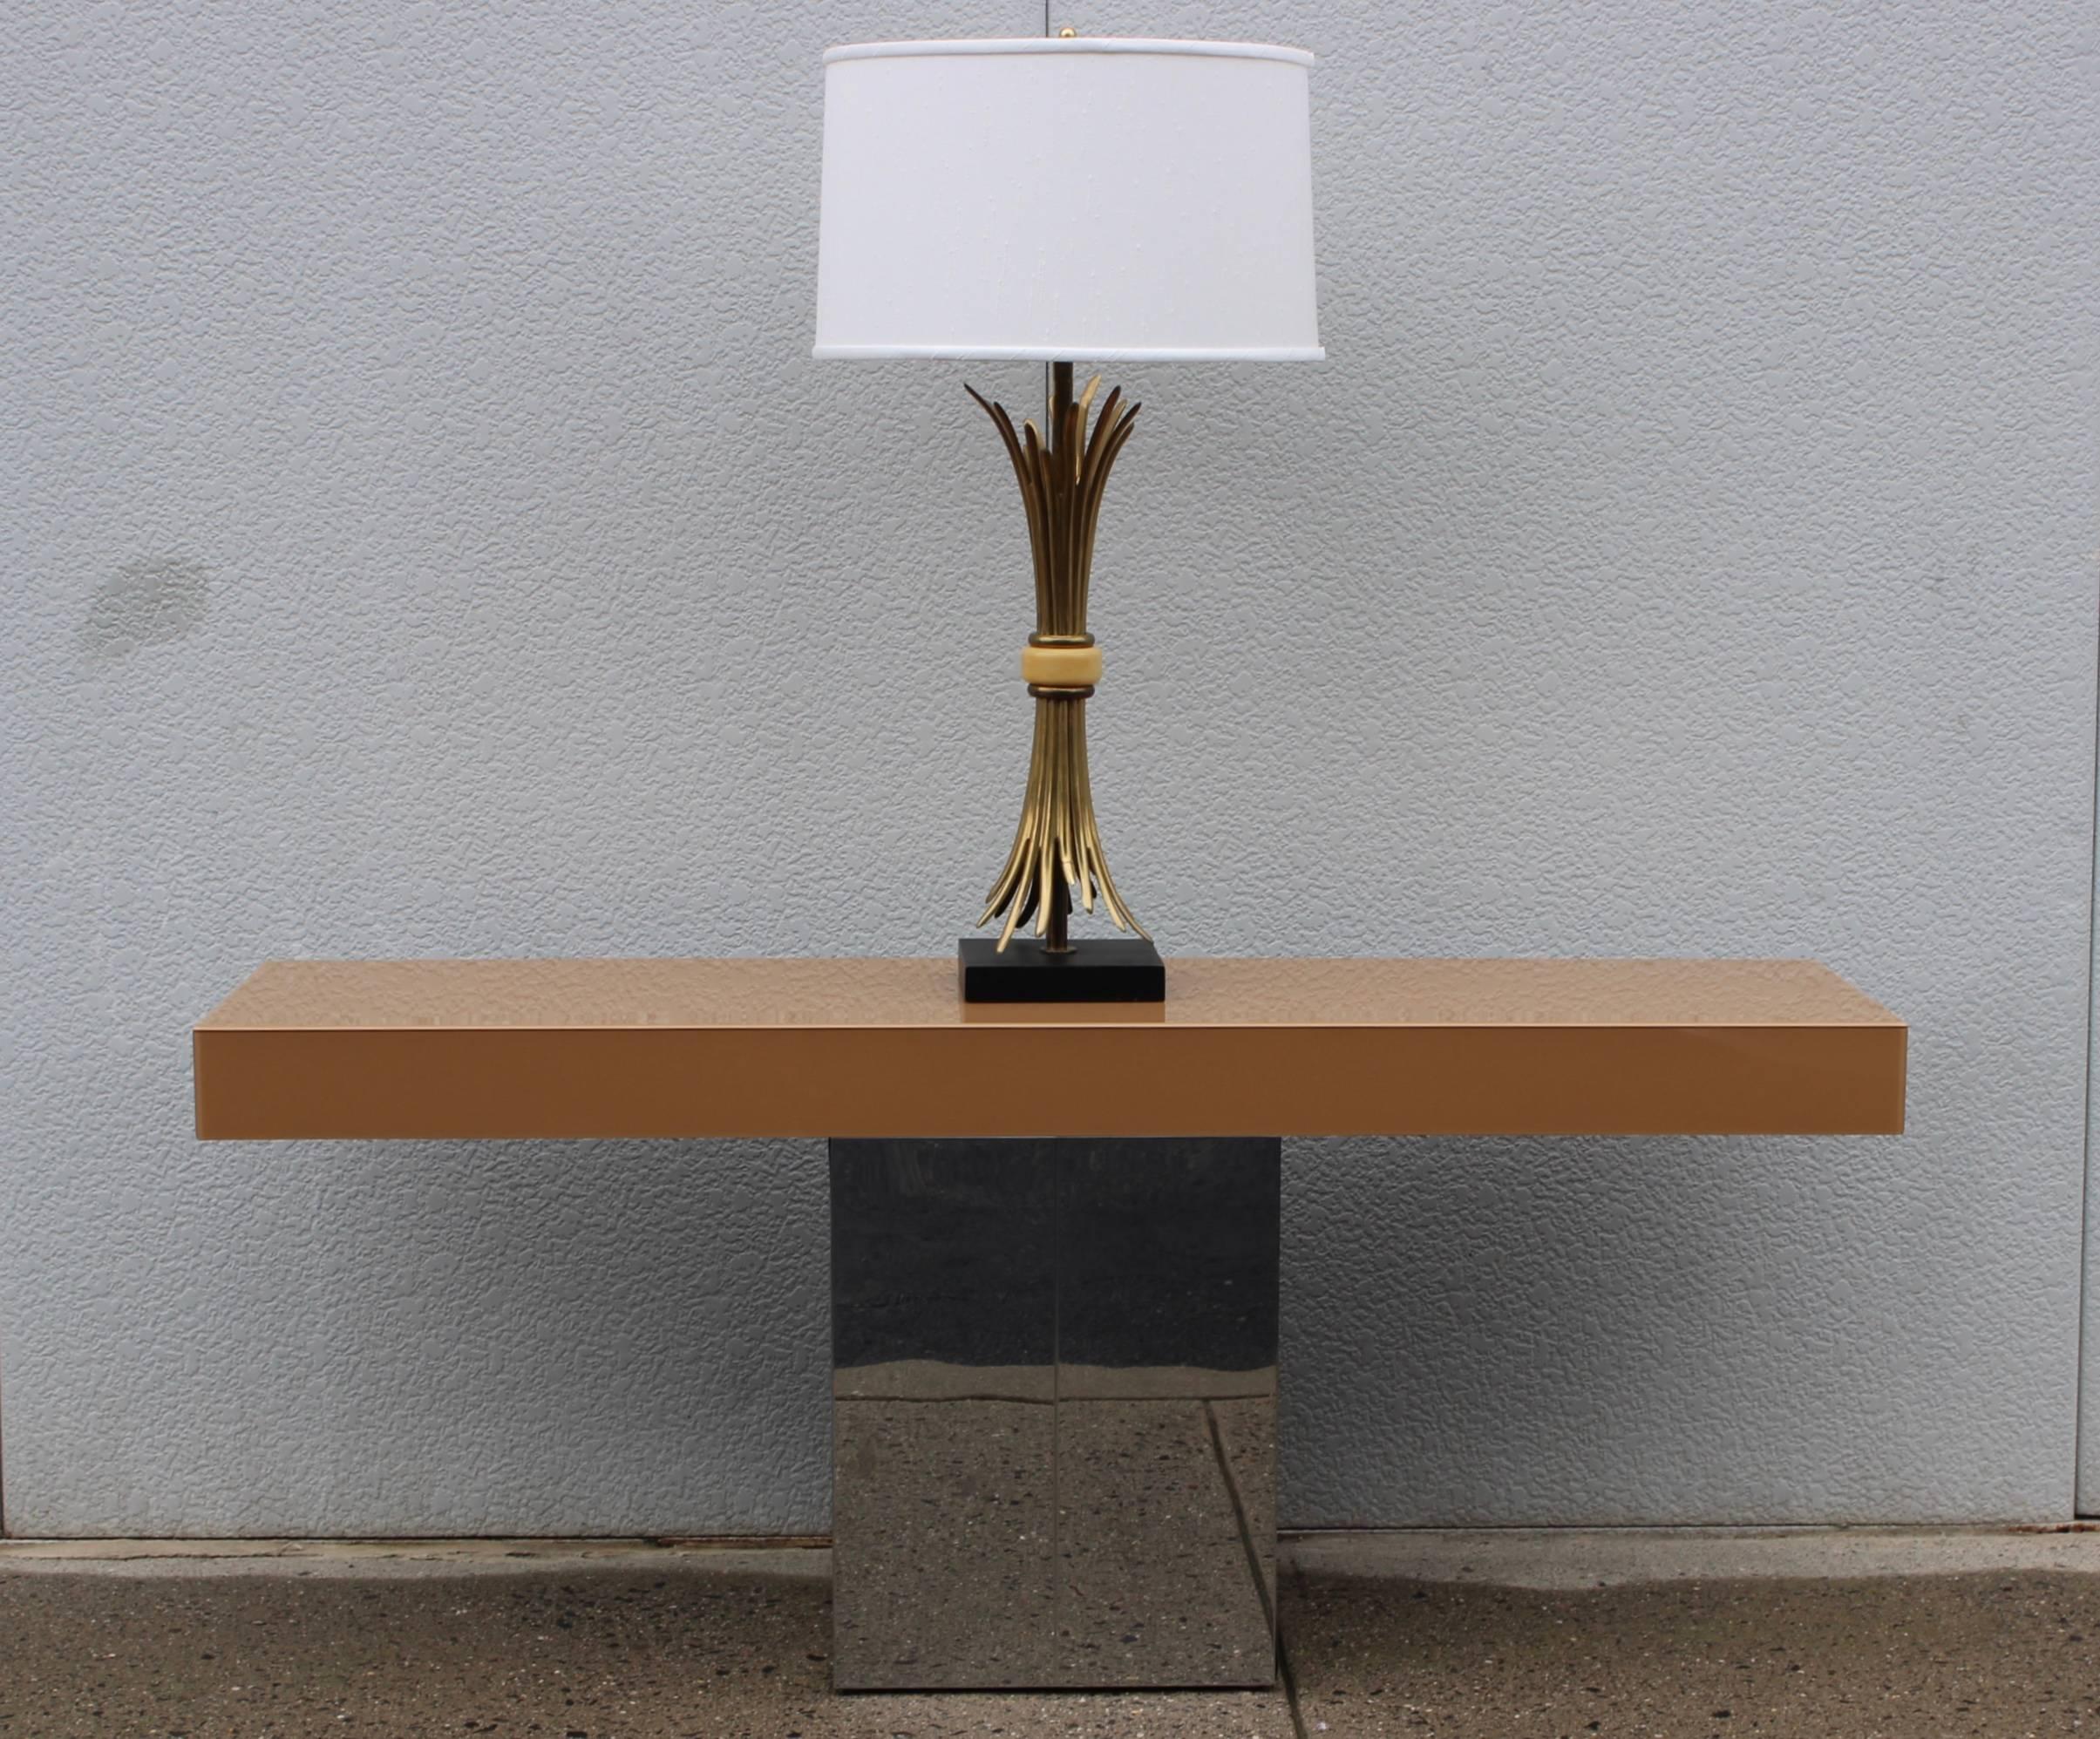 1980s bronze table lamp by Chapman.

Height to light socket 26

Shade for photography only.